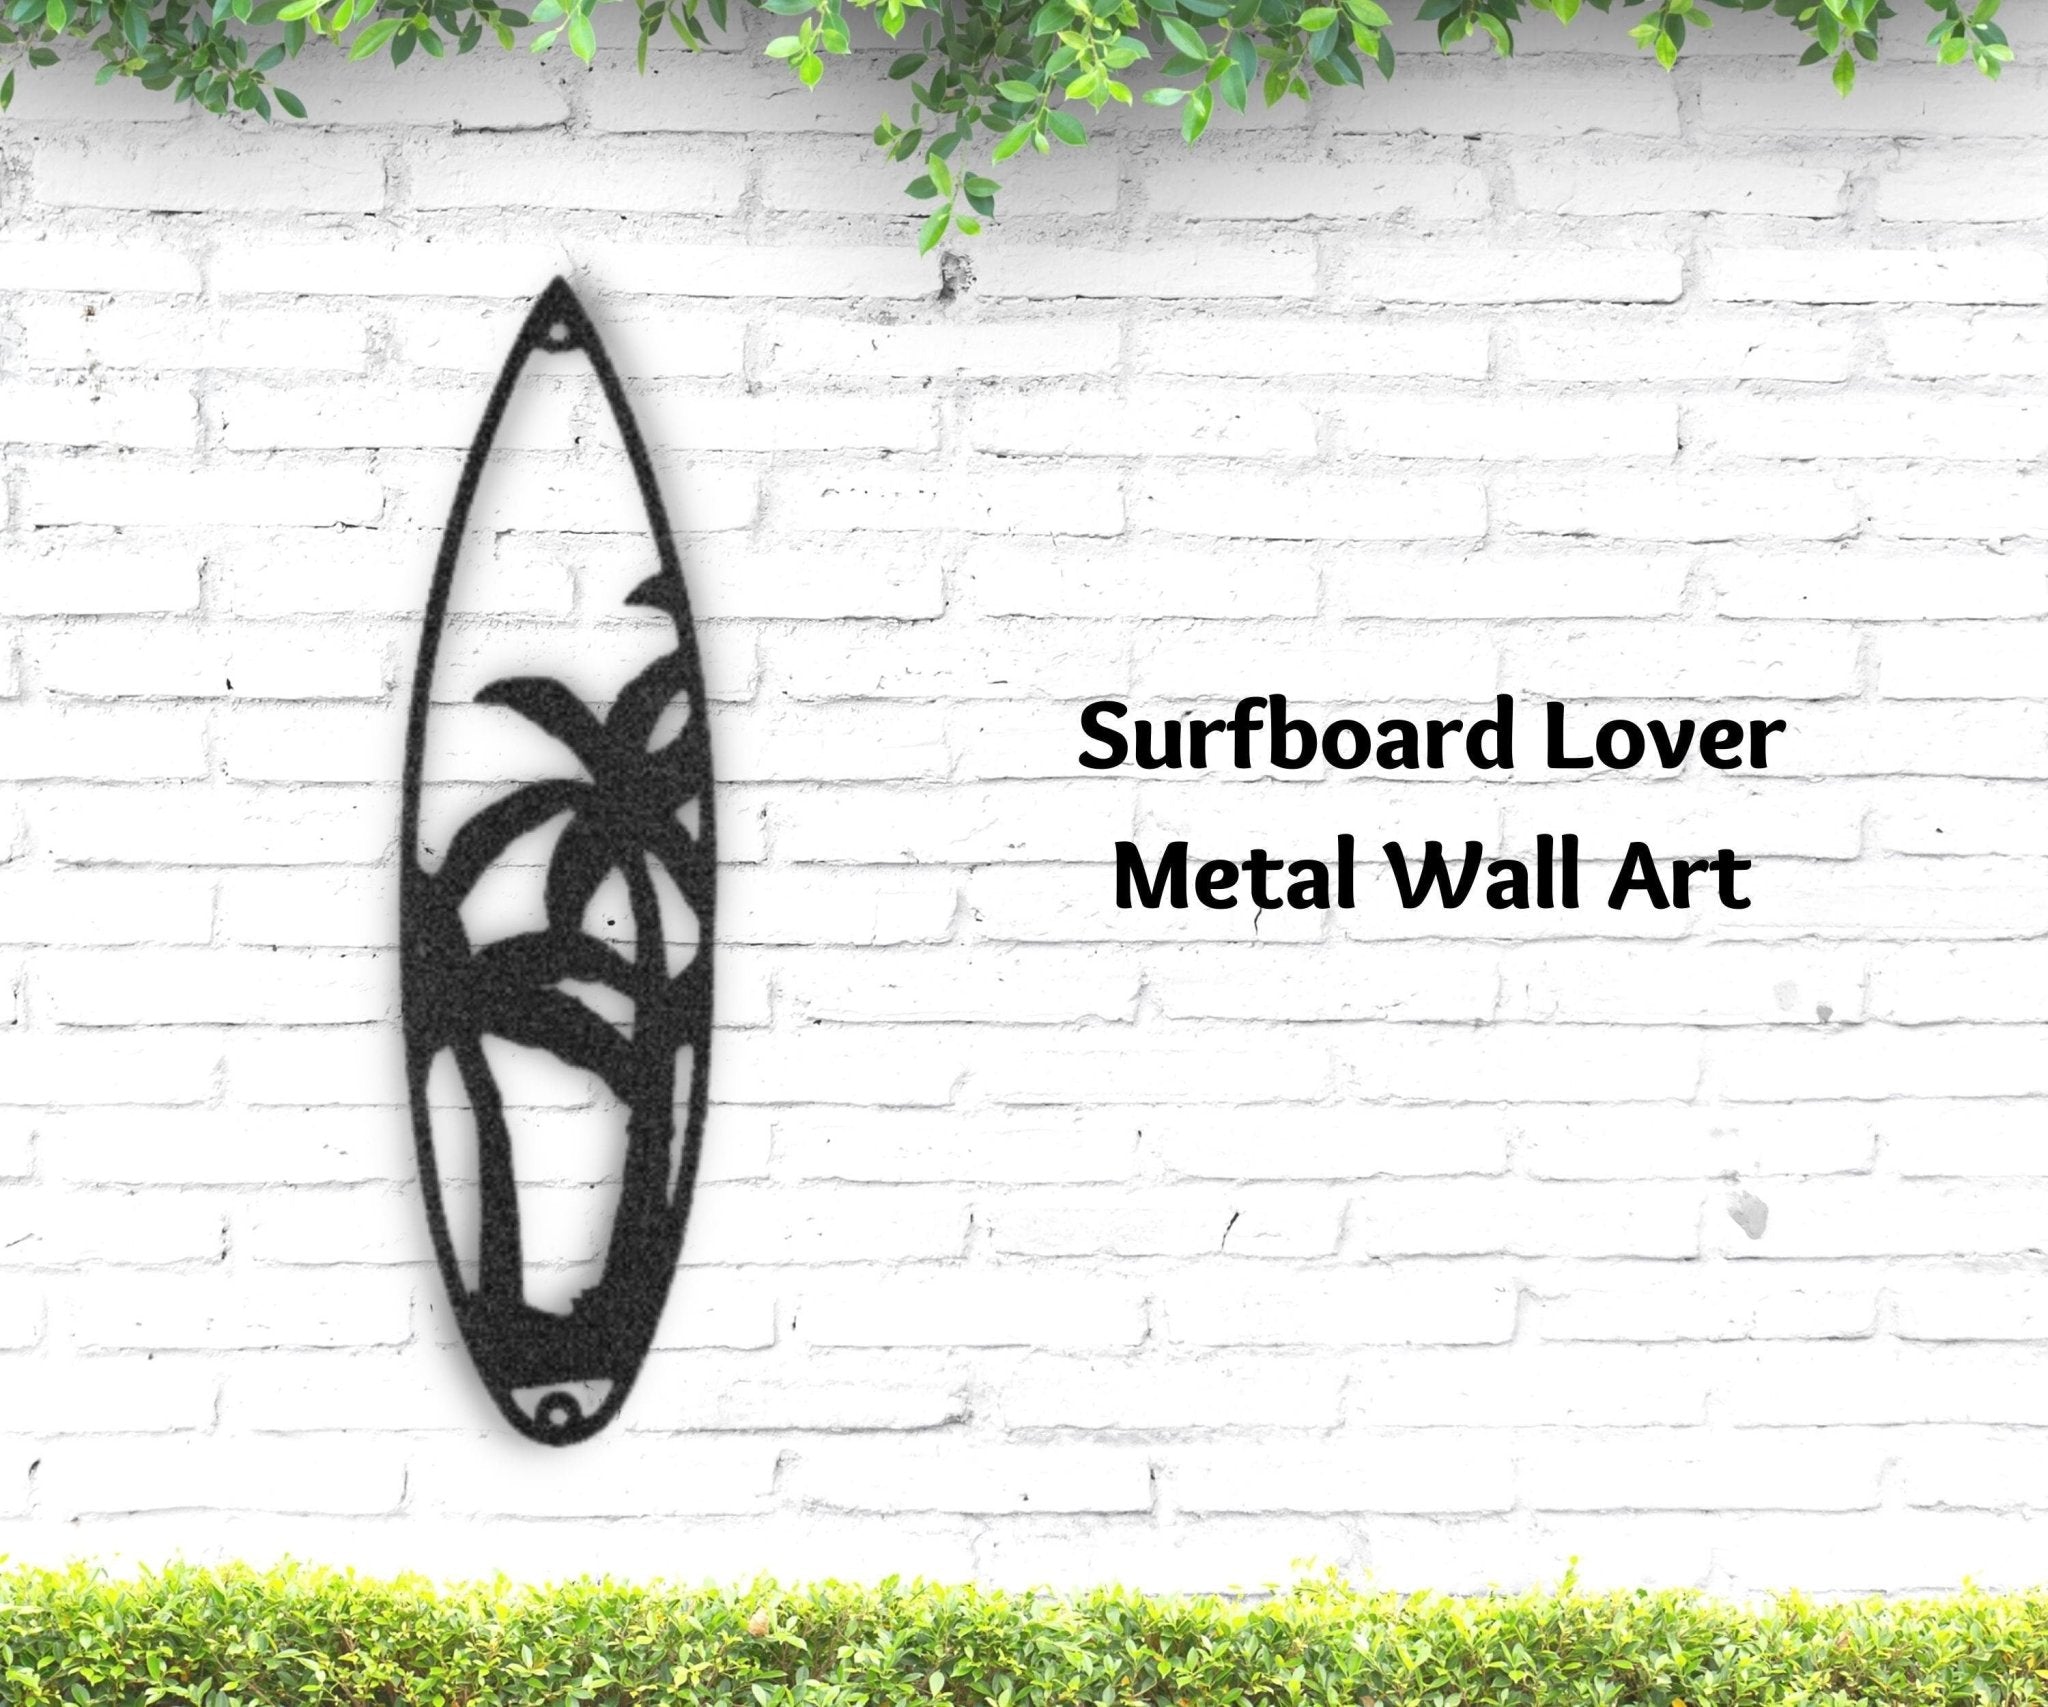 Surf Board Palm Trees Sign - Beach Surfing Metal Wall Art for Coastal Home Decor - Stylinsoul